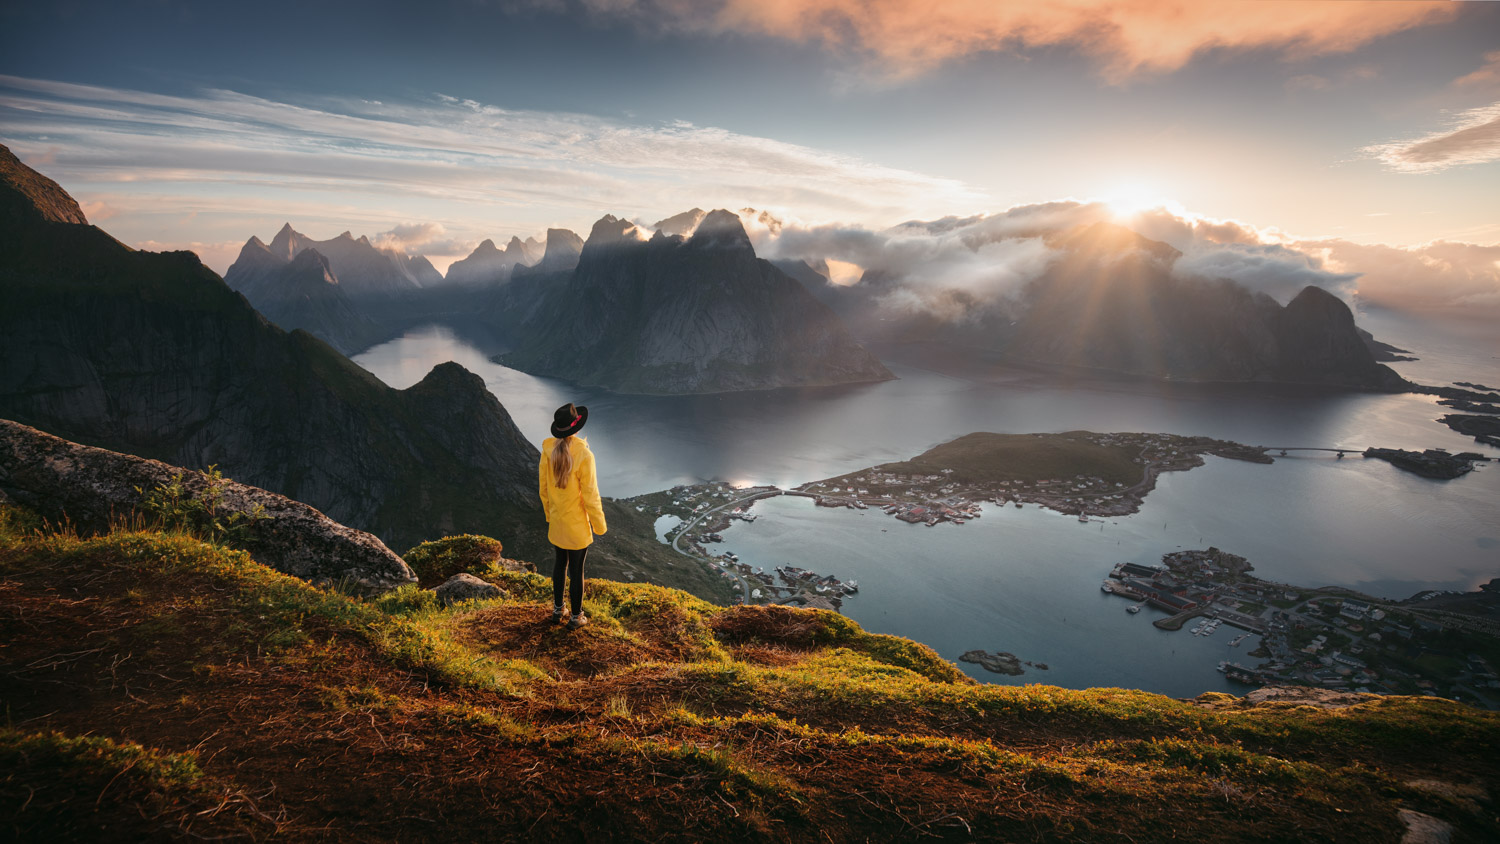 LOFOTEN ISLANDS - THE MOST SCENIC PLACE ON EARTH — Tomas Havel